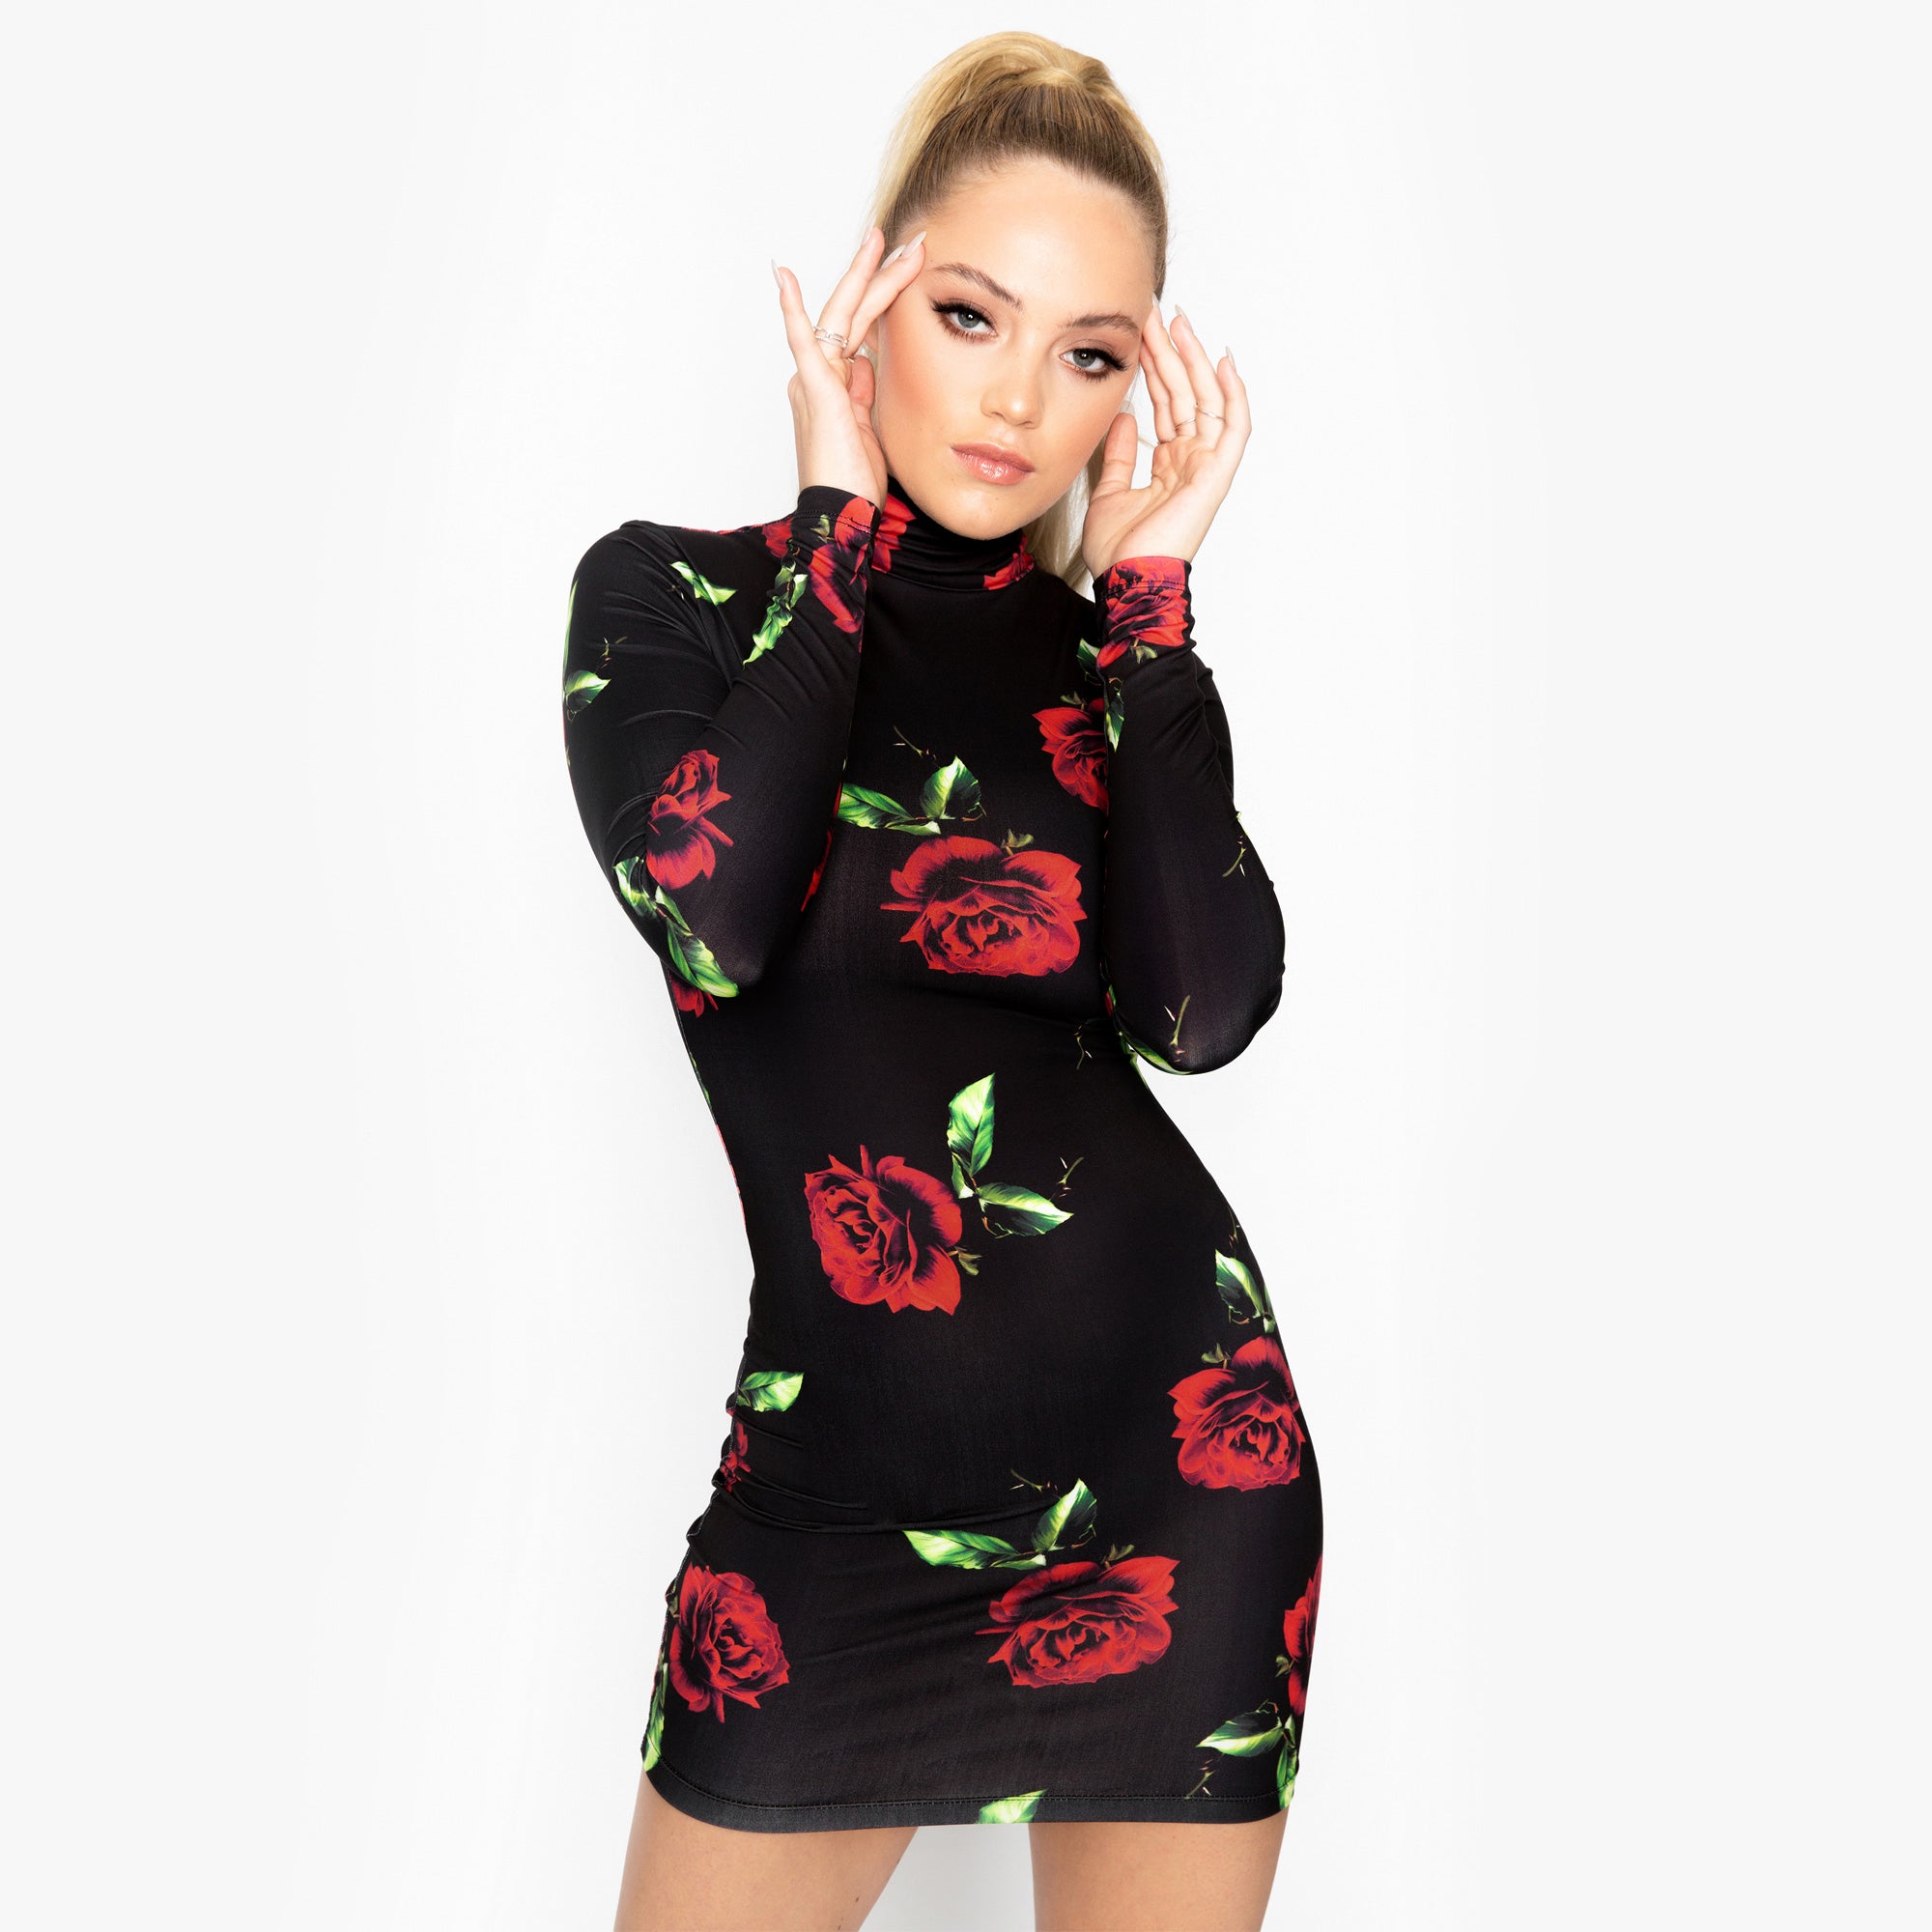 – Dress Red Rose Official Girl Jersey